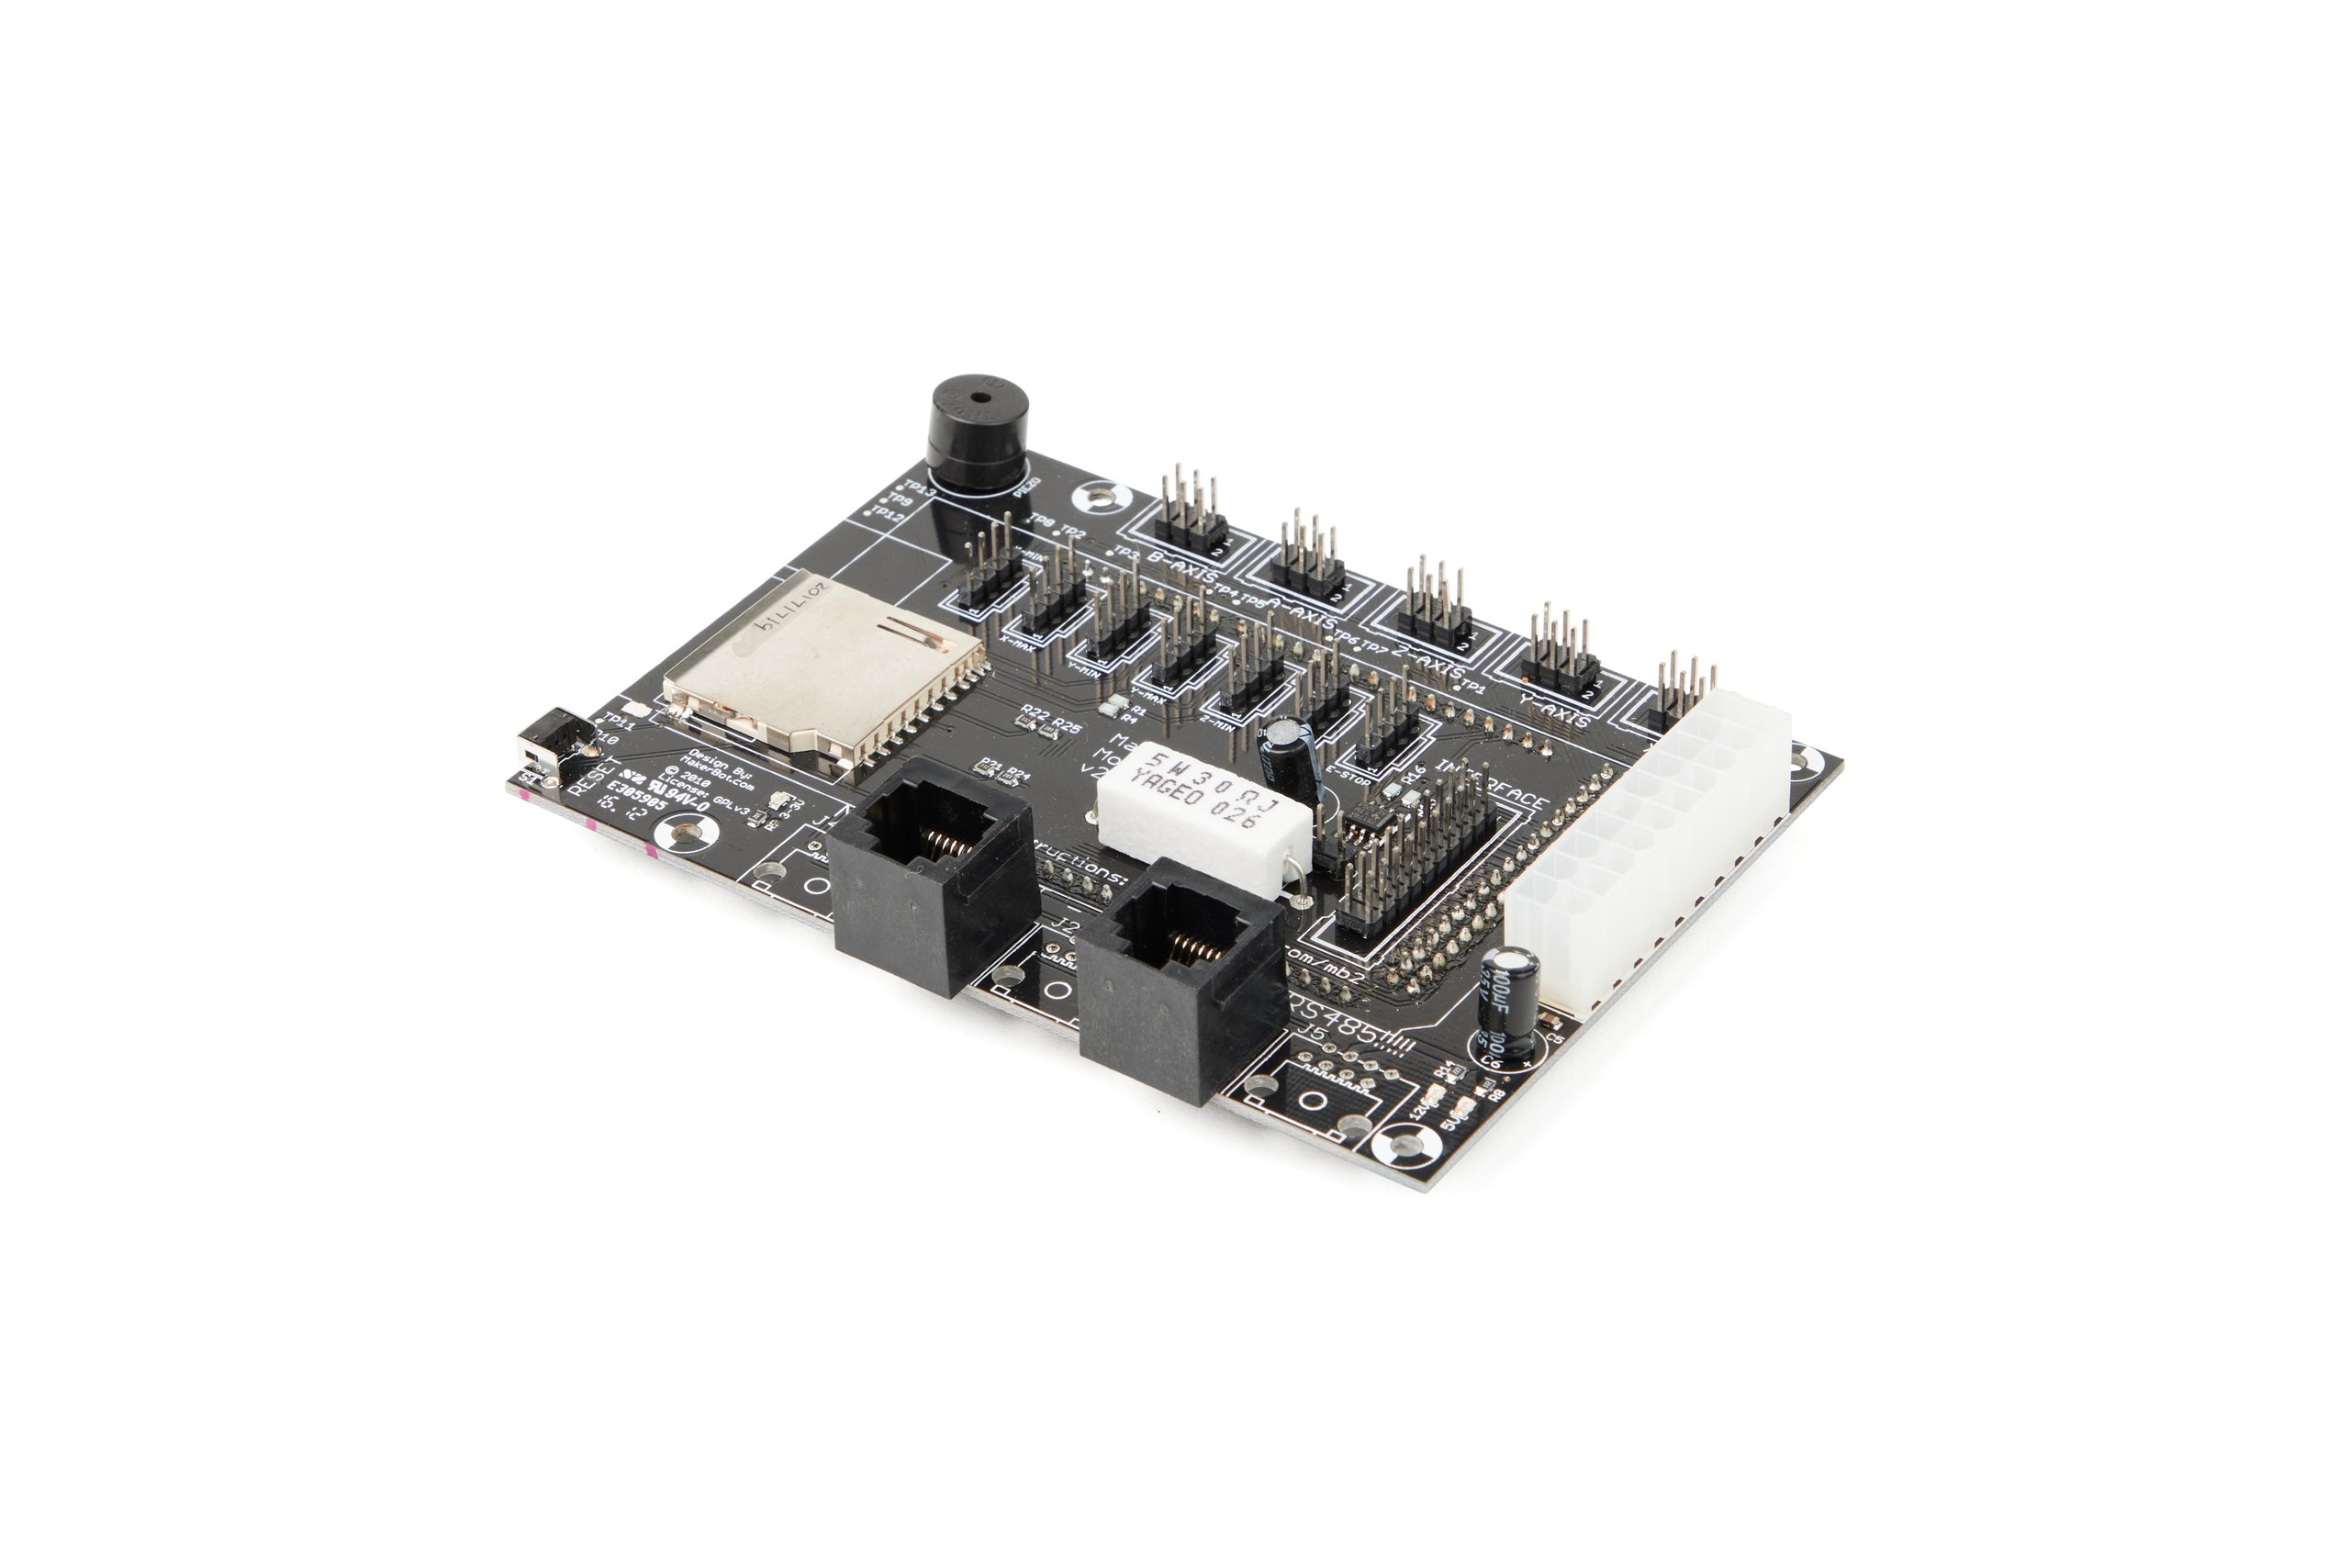 'v2.4' motherboard by MakerBot Industries